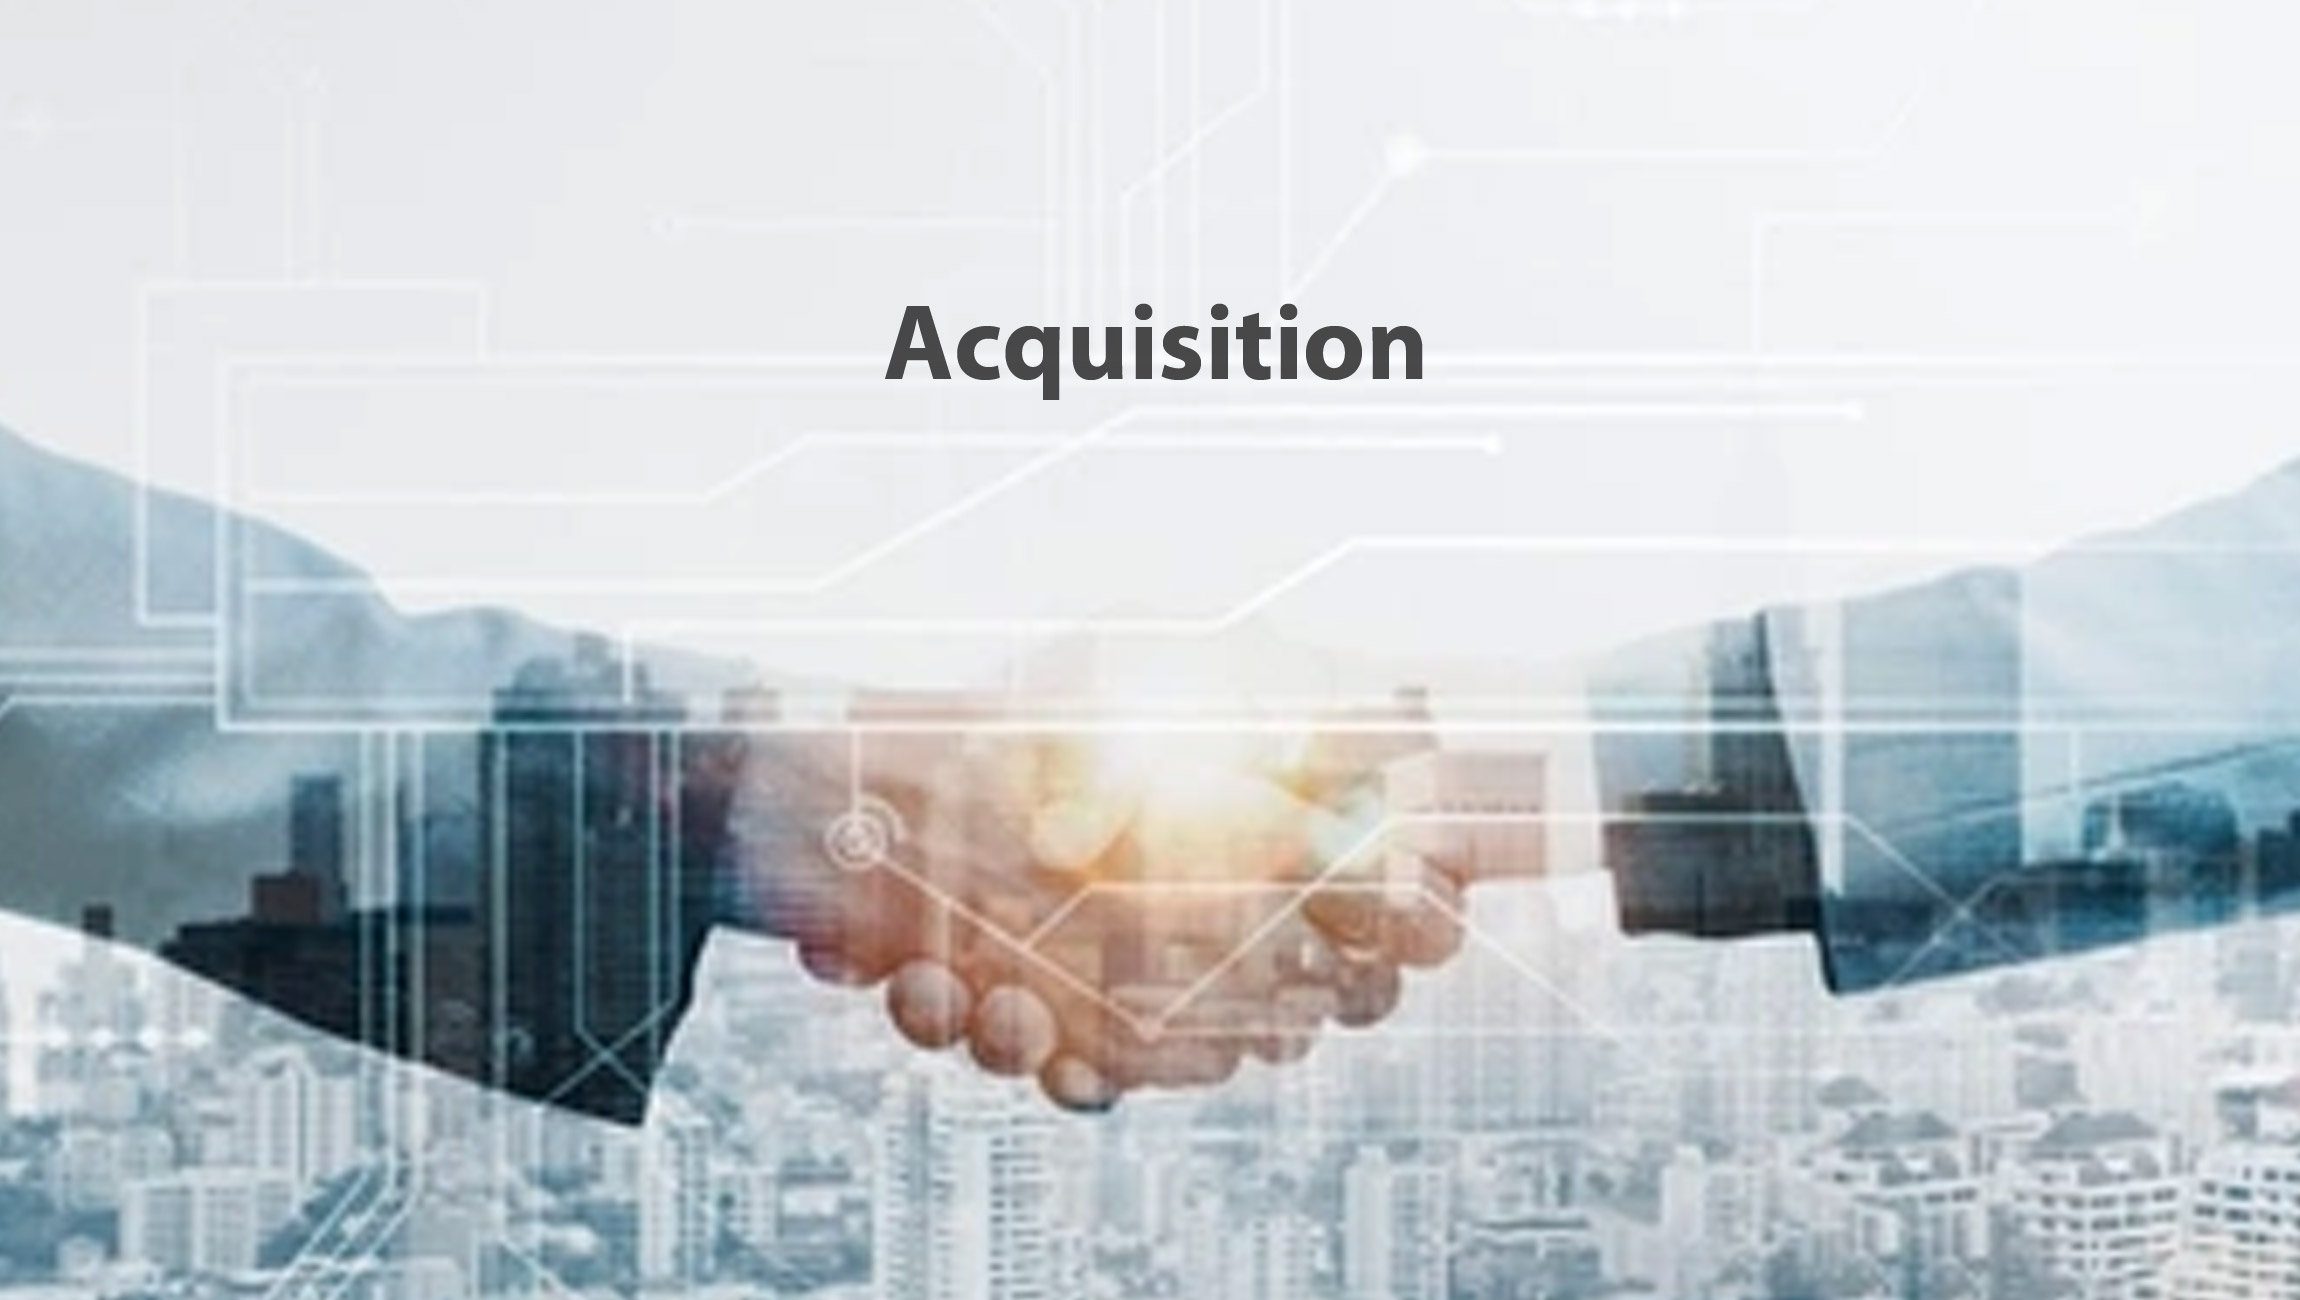 iQmetrix Goes Global With Close of Synchronoss DXP and Activation Solutions Acquisition